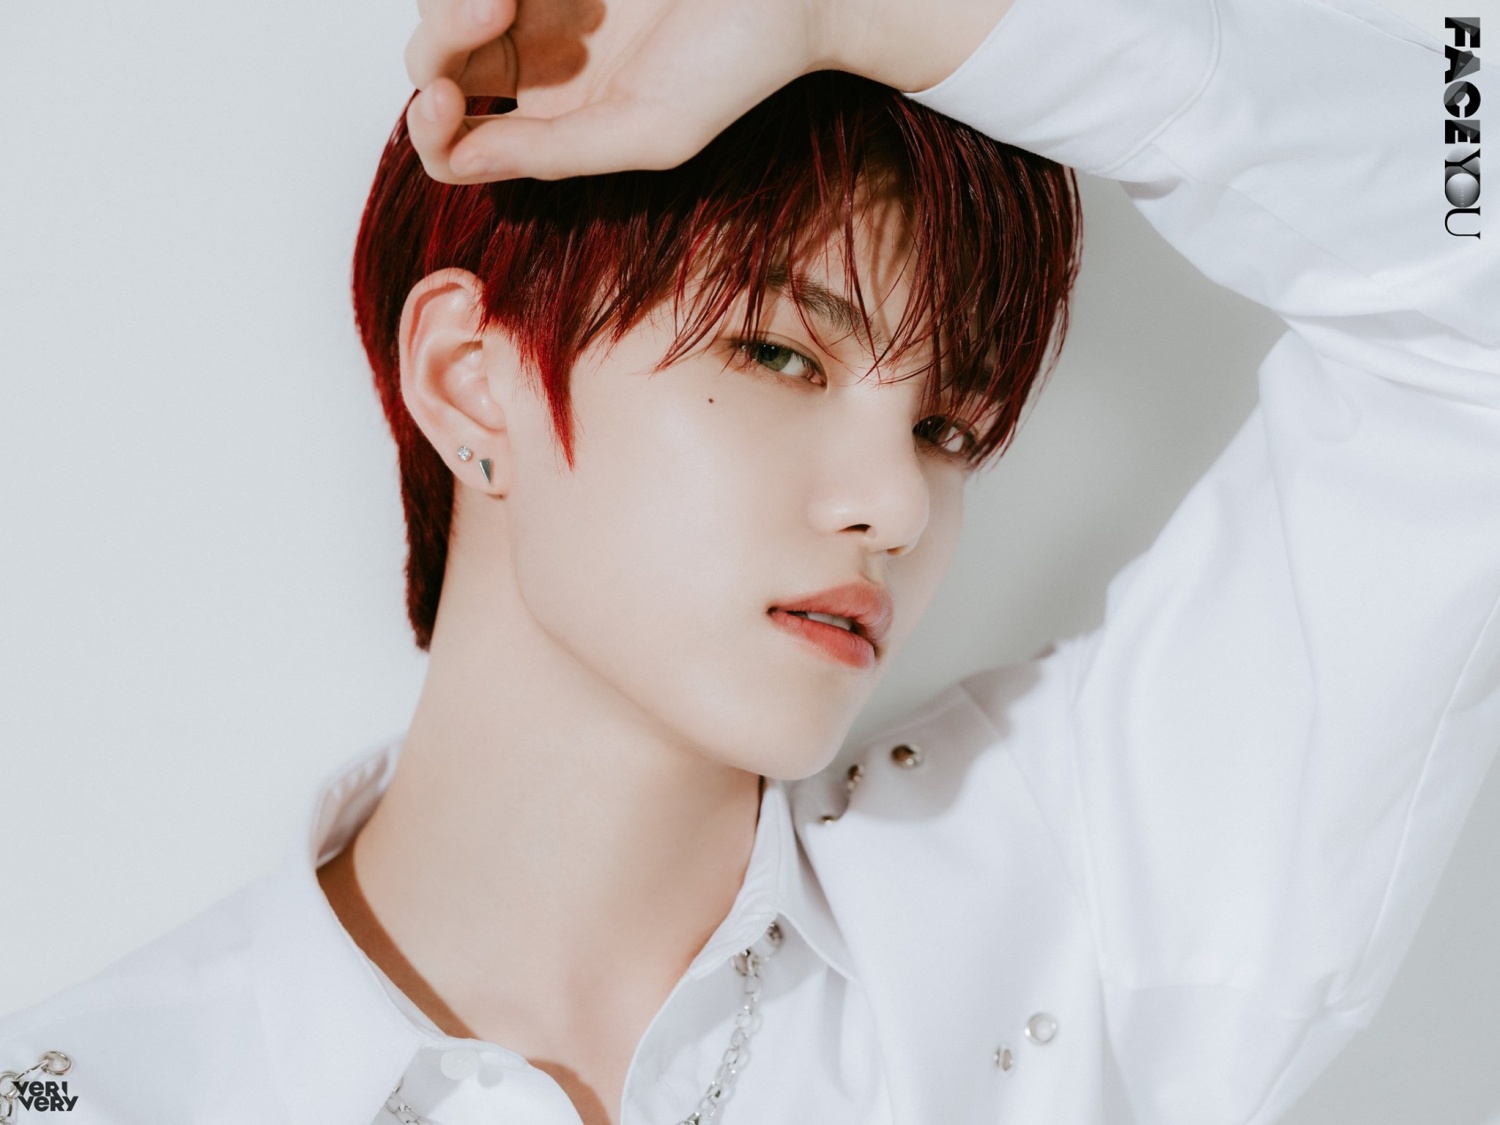 Verivery 'FACE YOU' official photo released